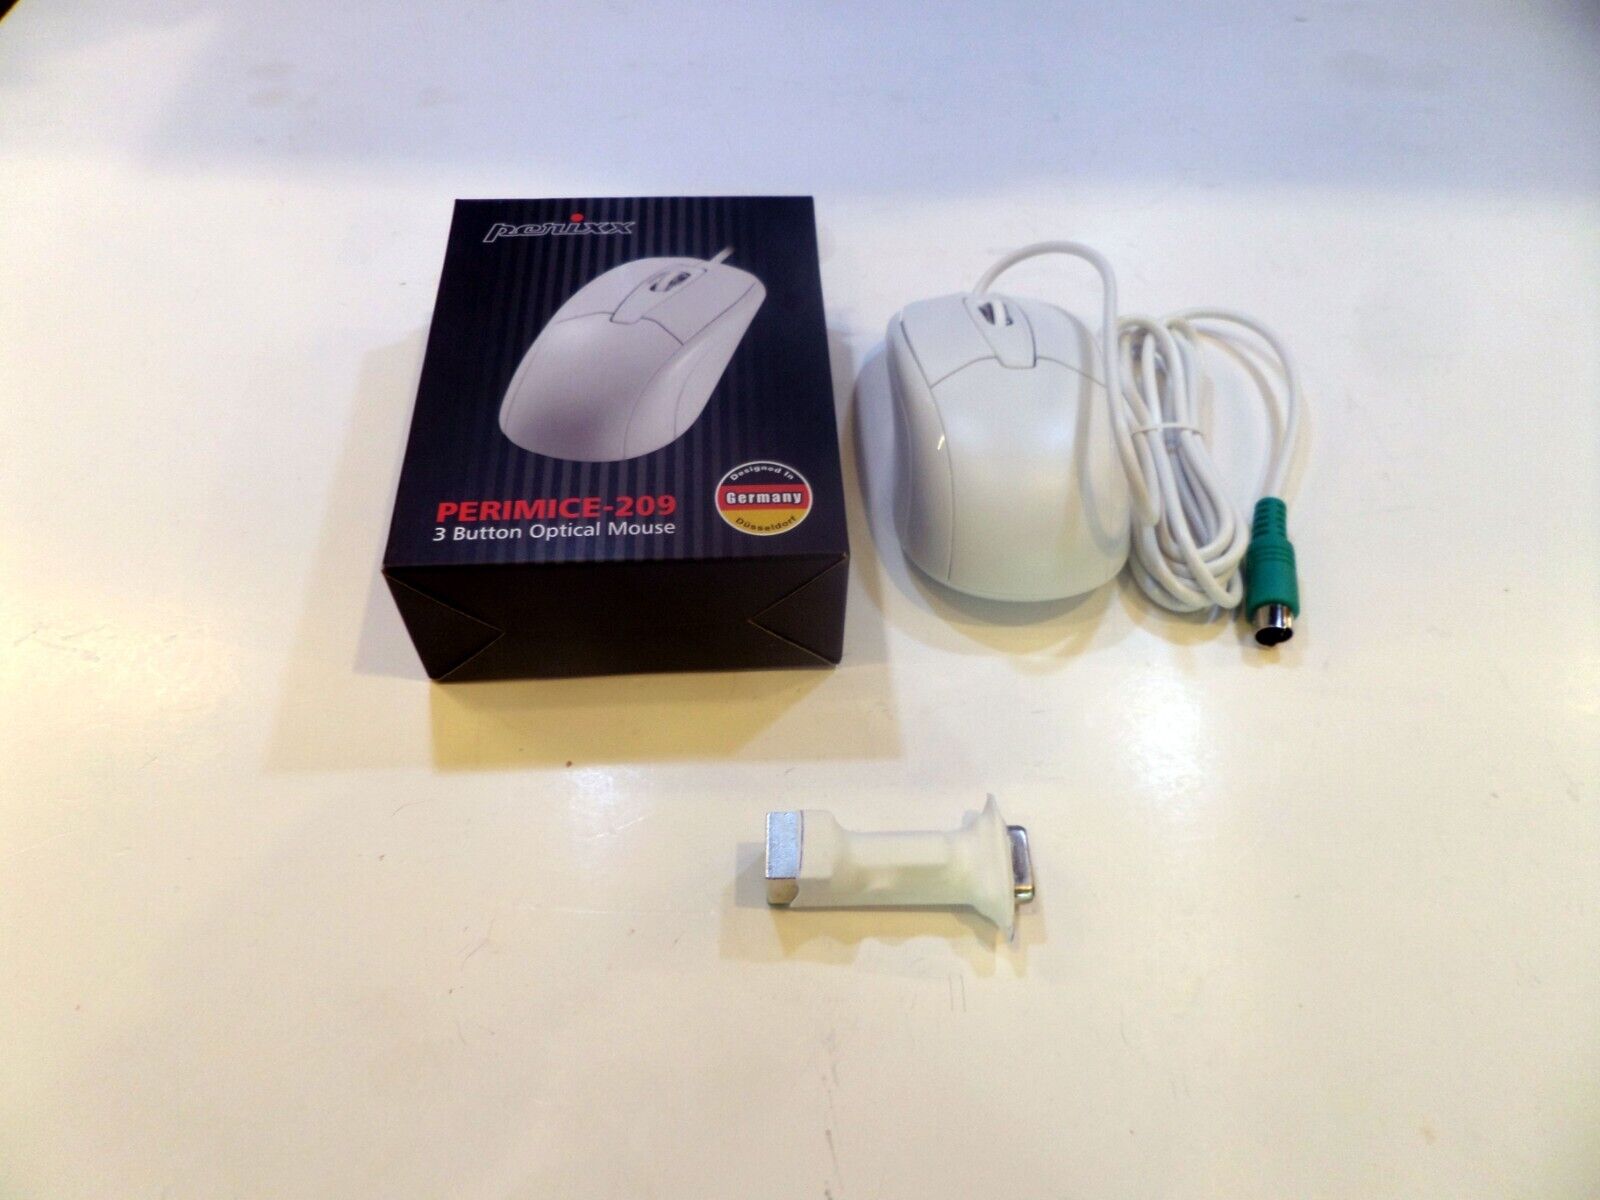 Commodore Amiga Compatible Mouse and Adapter - New, US seller